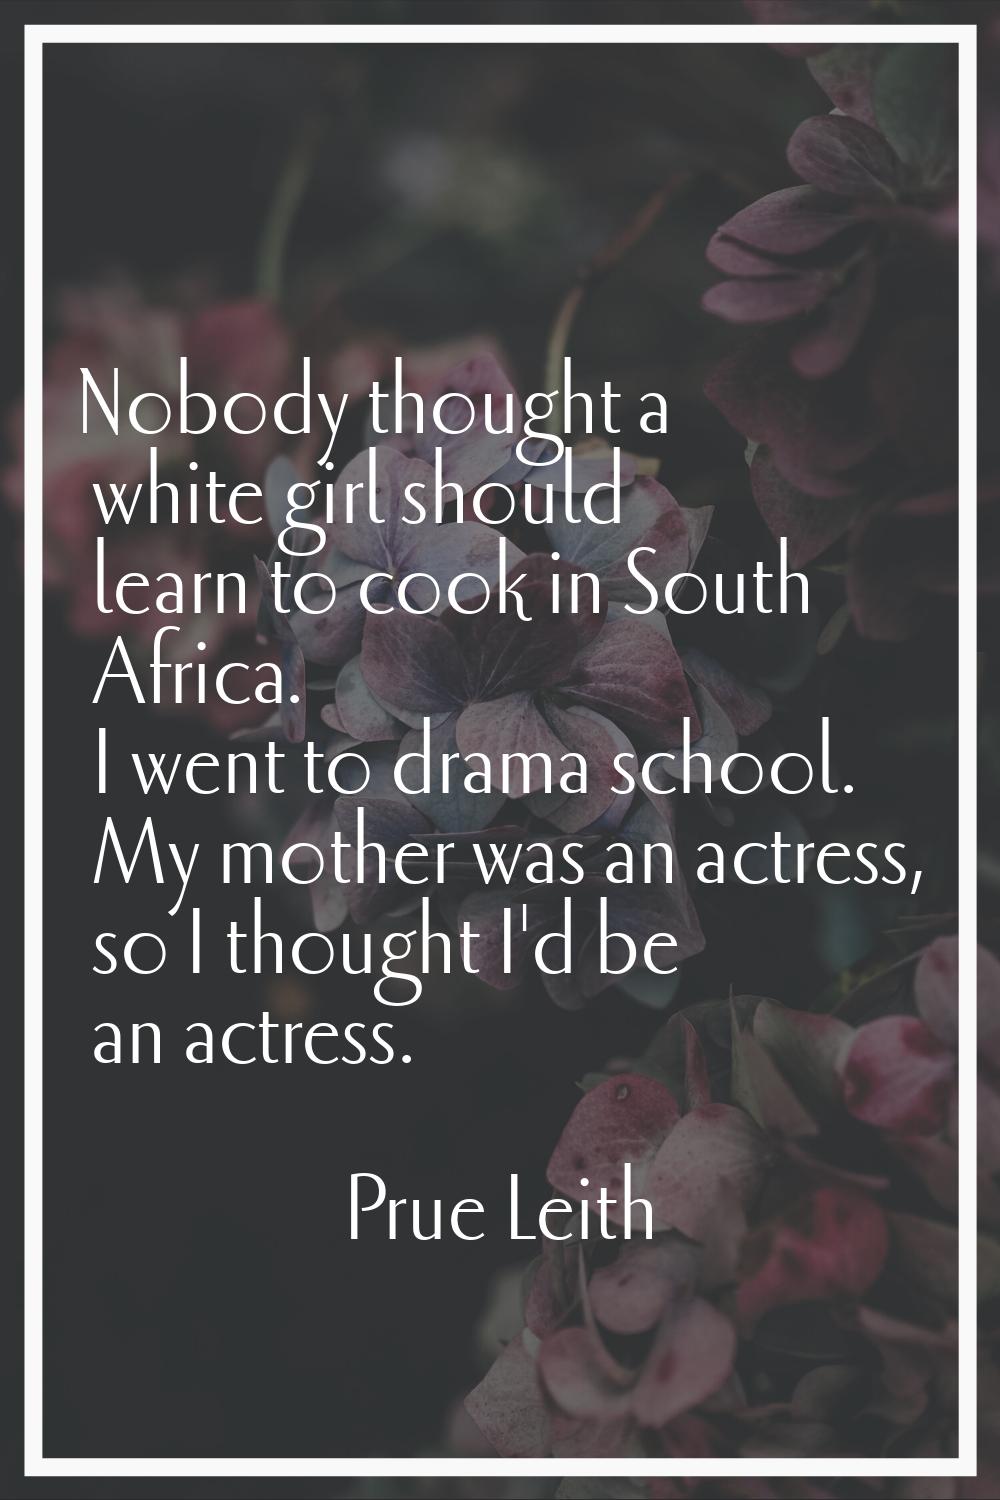 Nobody thought a white girl should learn to cook in South Africa. I went to drama school. My mother